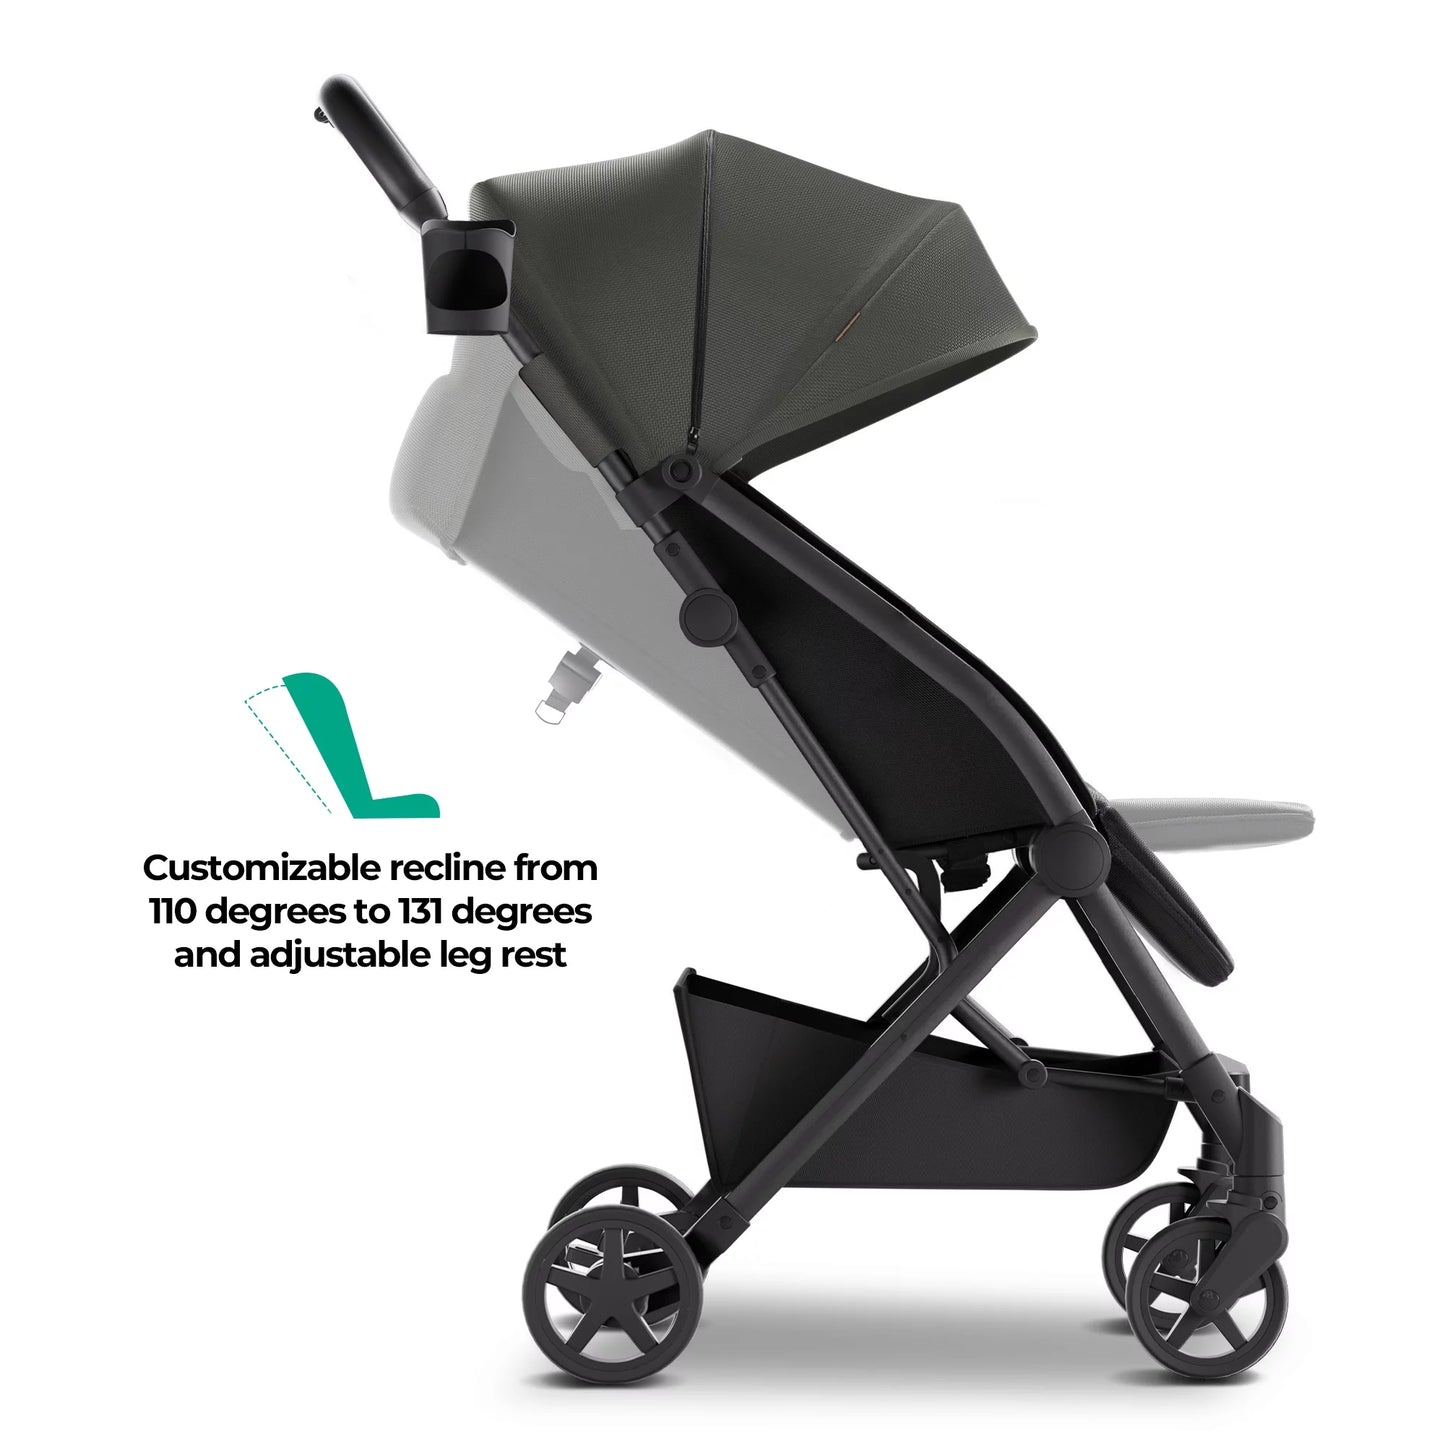 Lightweight Baby Stroller, Compact Stroller for Airplane Travel, Green, 14.2 Lb, Unisex